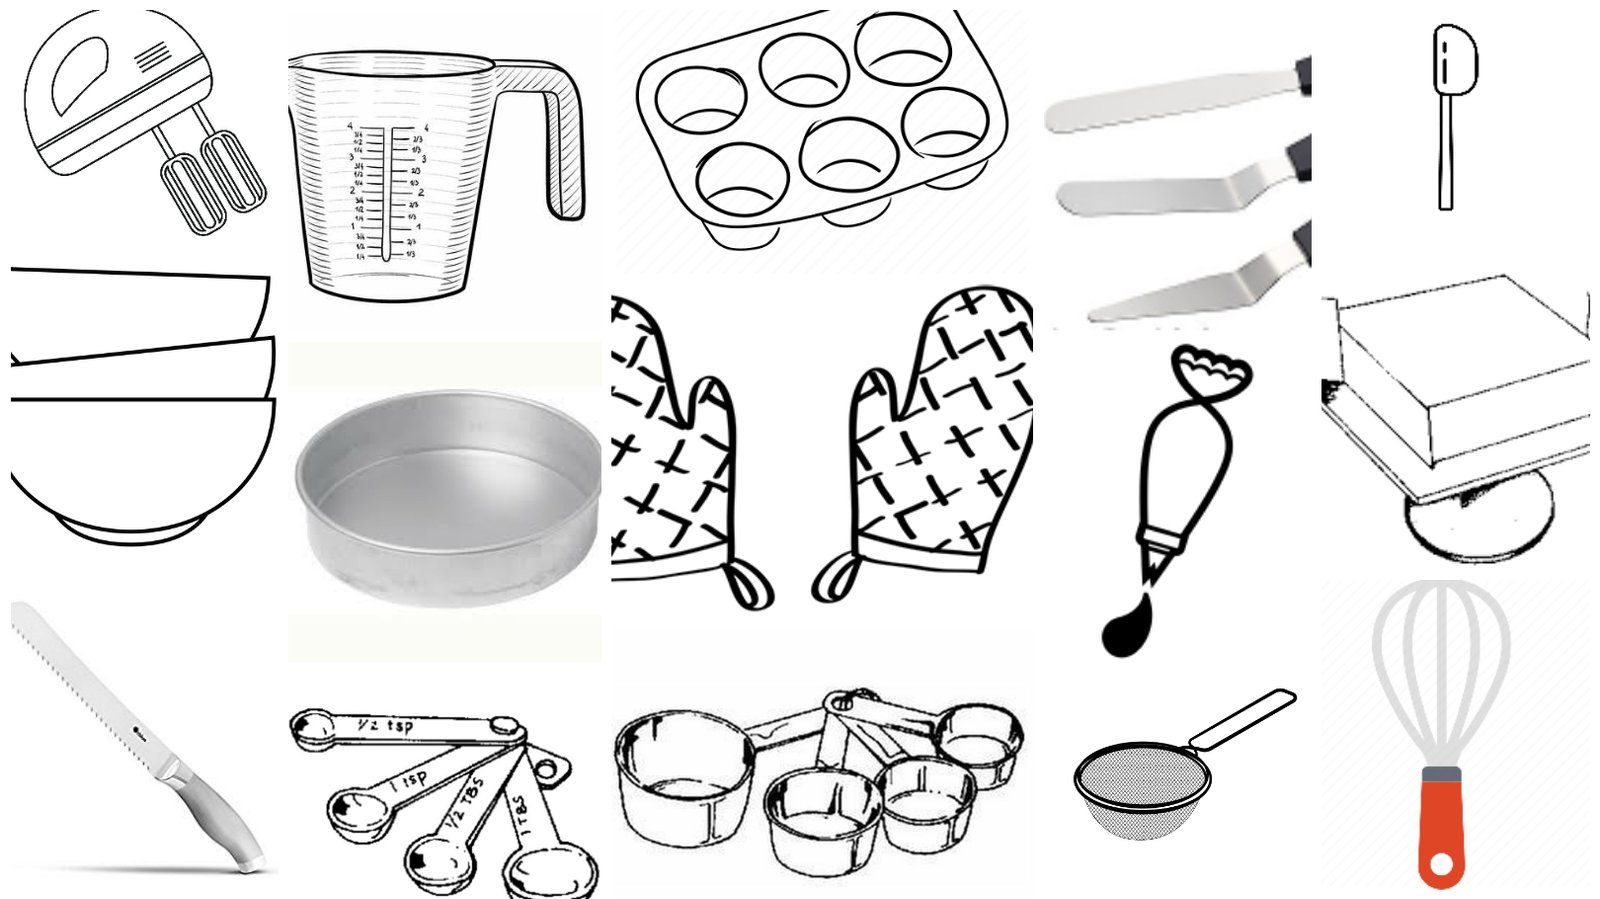 Baking tools: Essential baking tools and equipment for your kitchen